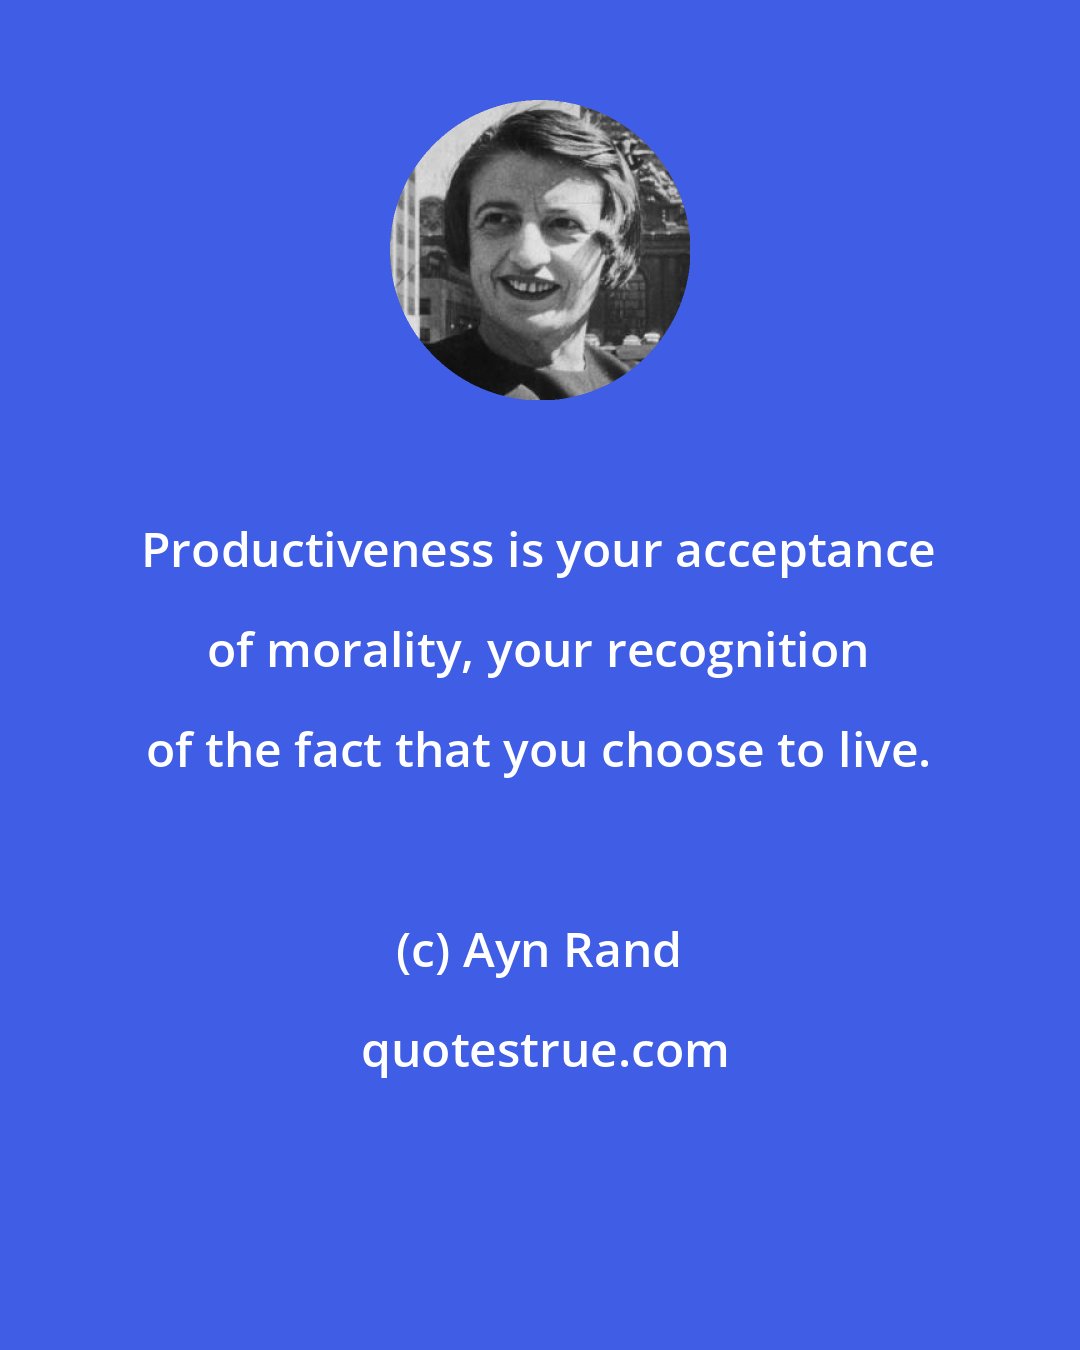 Ayn Rand: Productiveness is your acceptance of morality, your recognition of the fact that you choose to live.